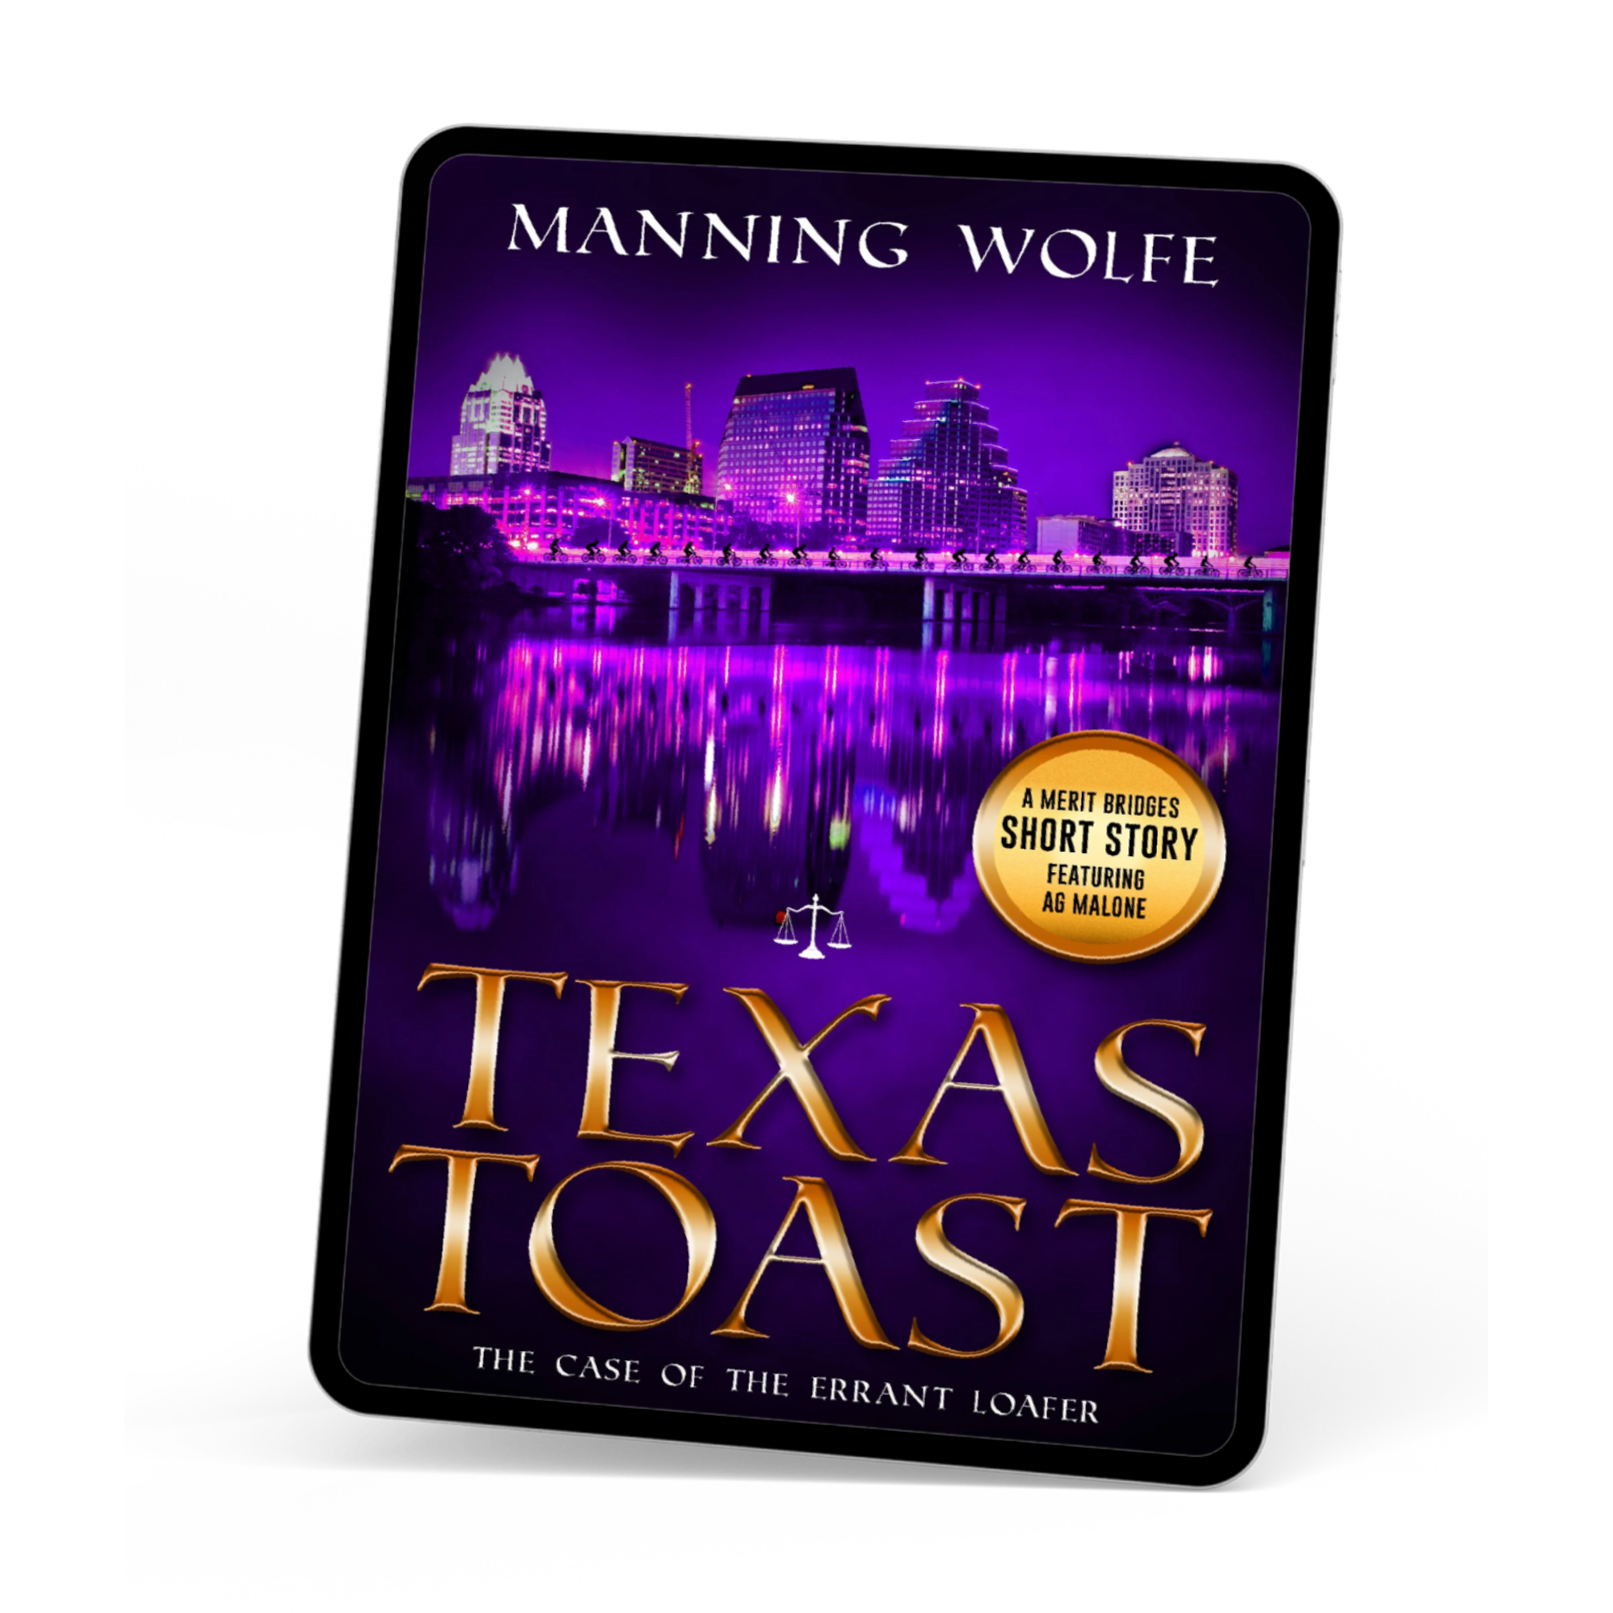 Texas Toast: The Case of the Errant Loafer